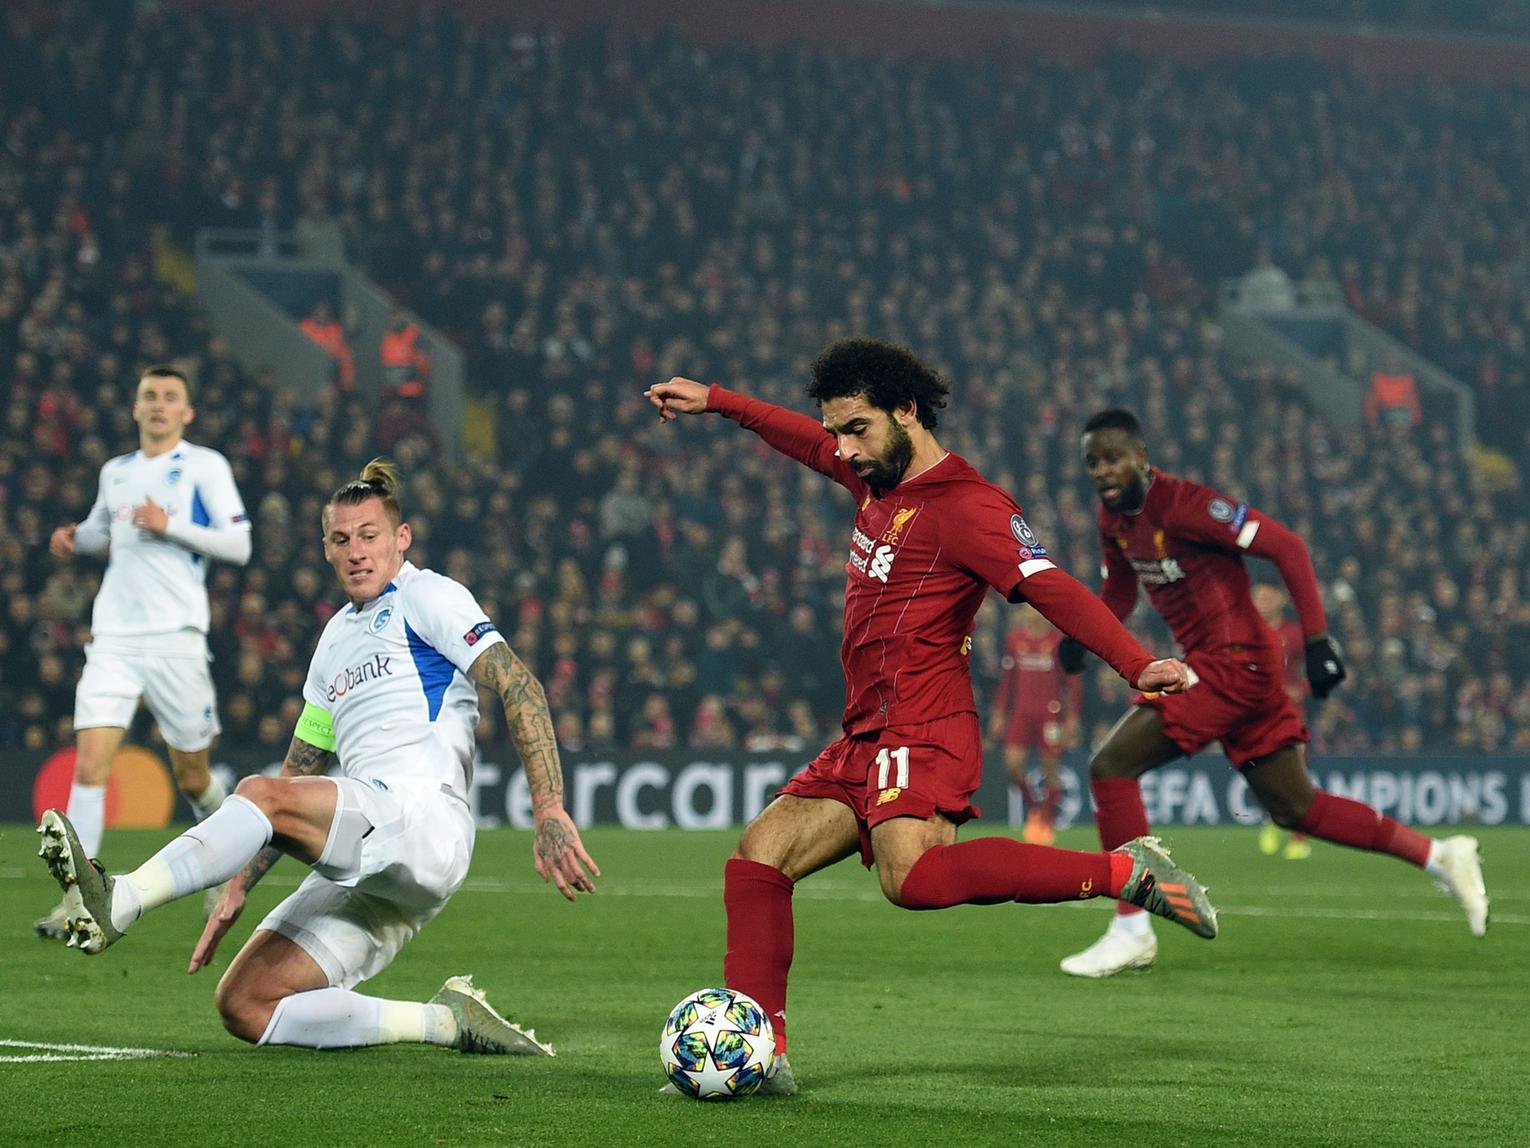 Jurgen Klopp's side take on Crystal Palace this weekend, and will aim to continue their march towards the title. He's revealed that he's still not made a call over whether Salah will play, as he continues to recover from injury.